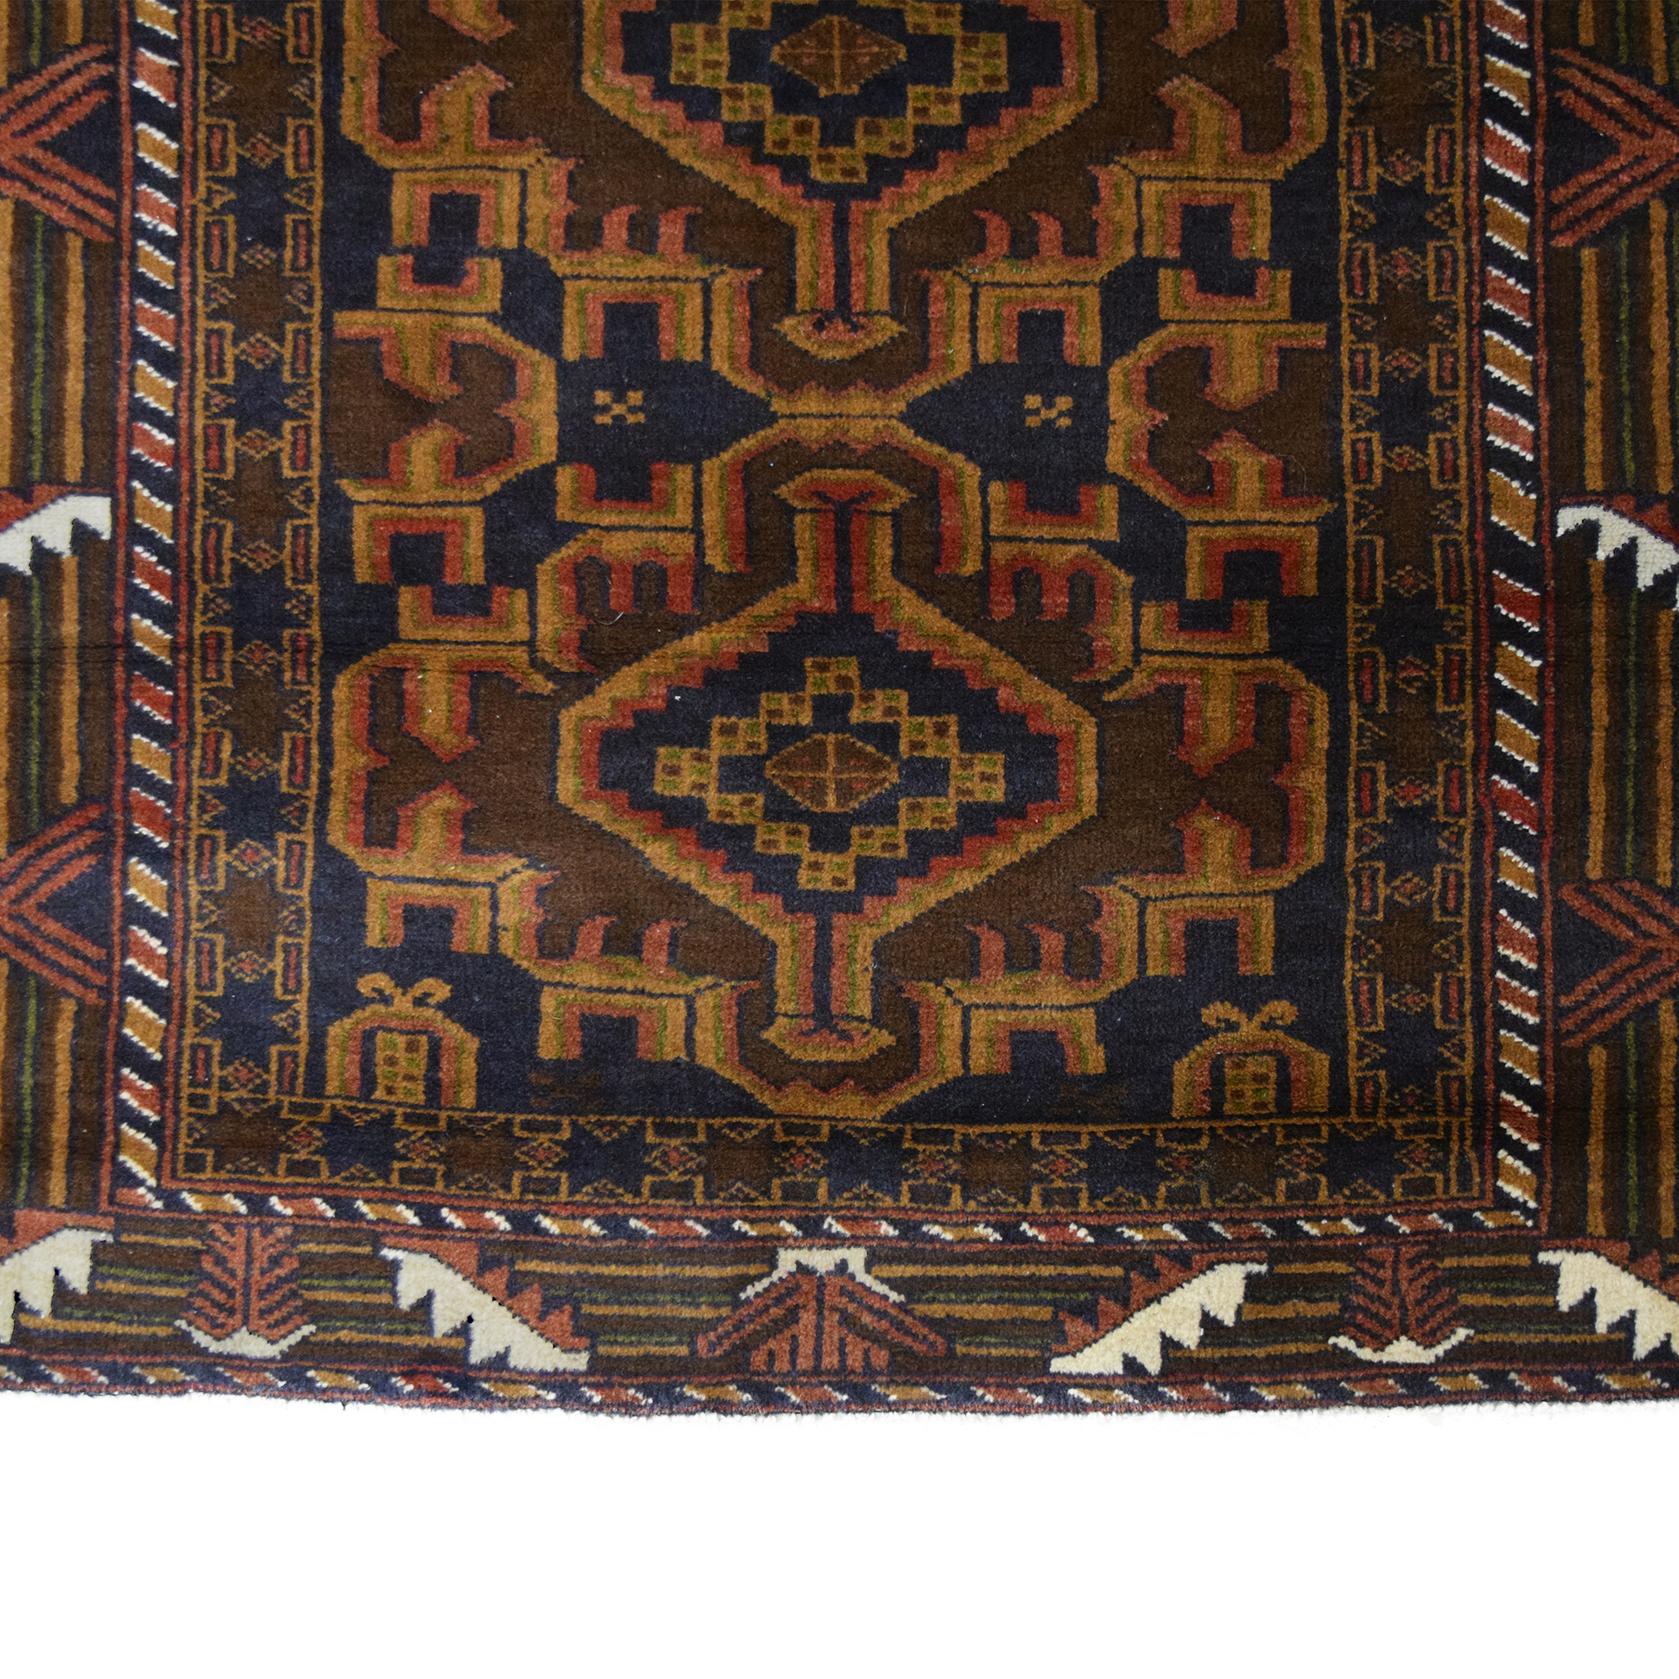 Hand-Knotted Traditional Persian Balouchi Carpet in Brown, Cream, and Black Wool 3’ x 4’7”